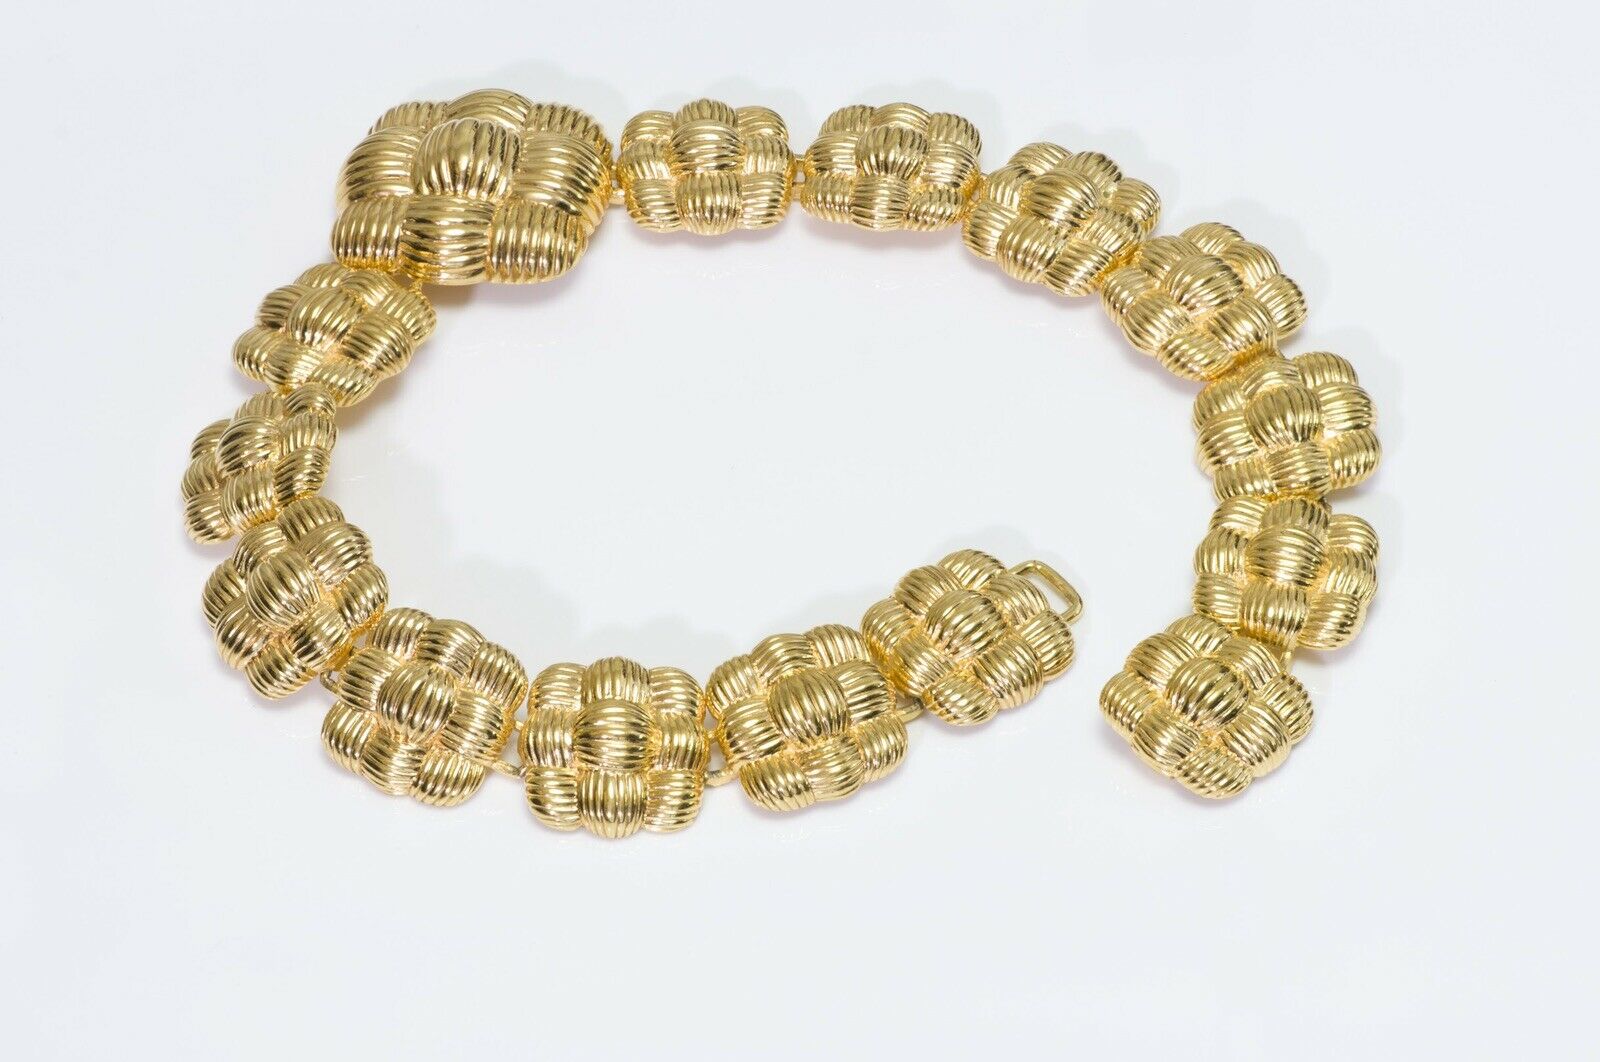 Vintage FENDI Chunky Link Textured Woven Collar Necklace